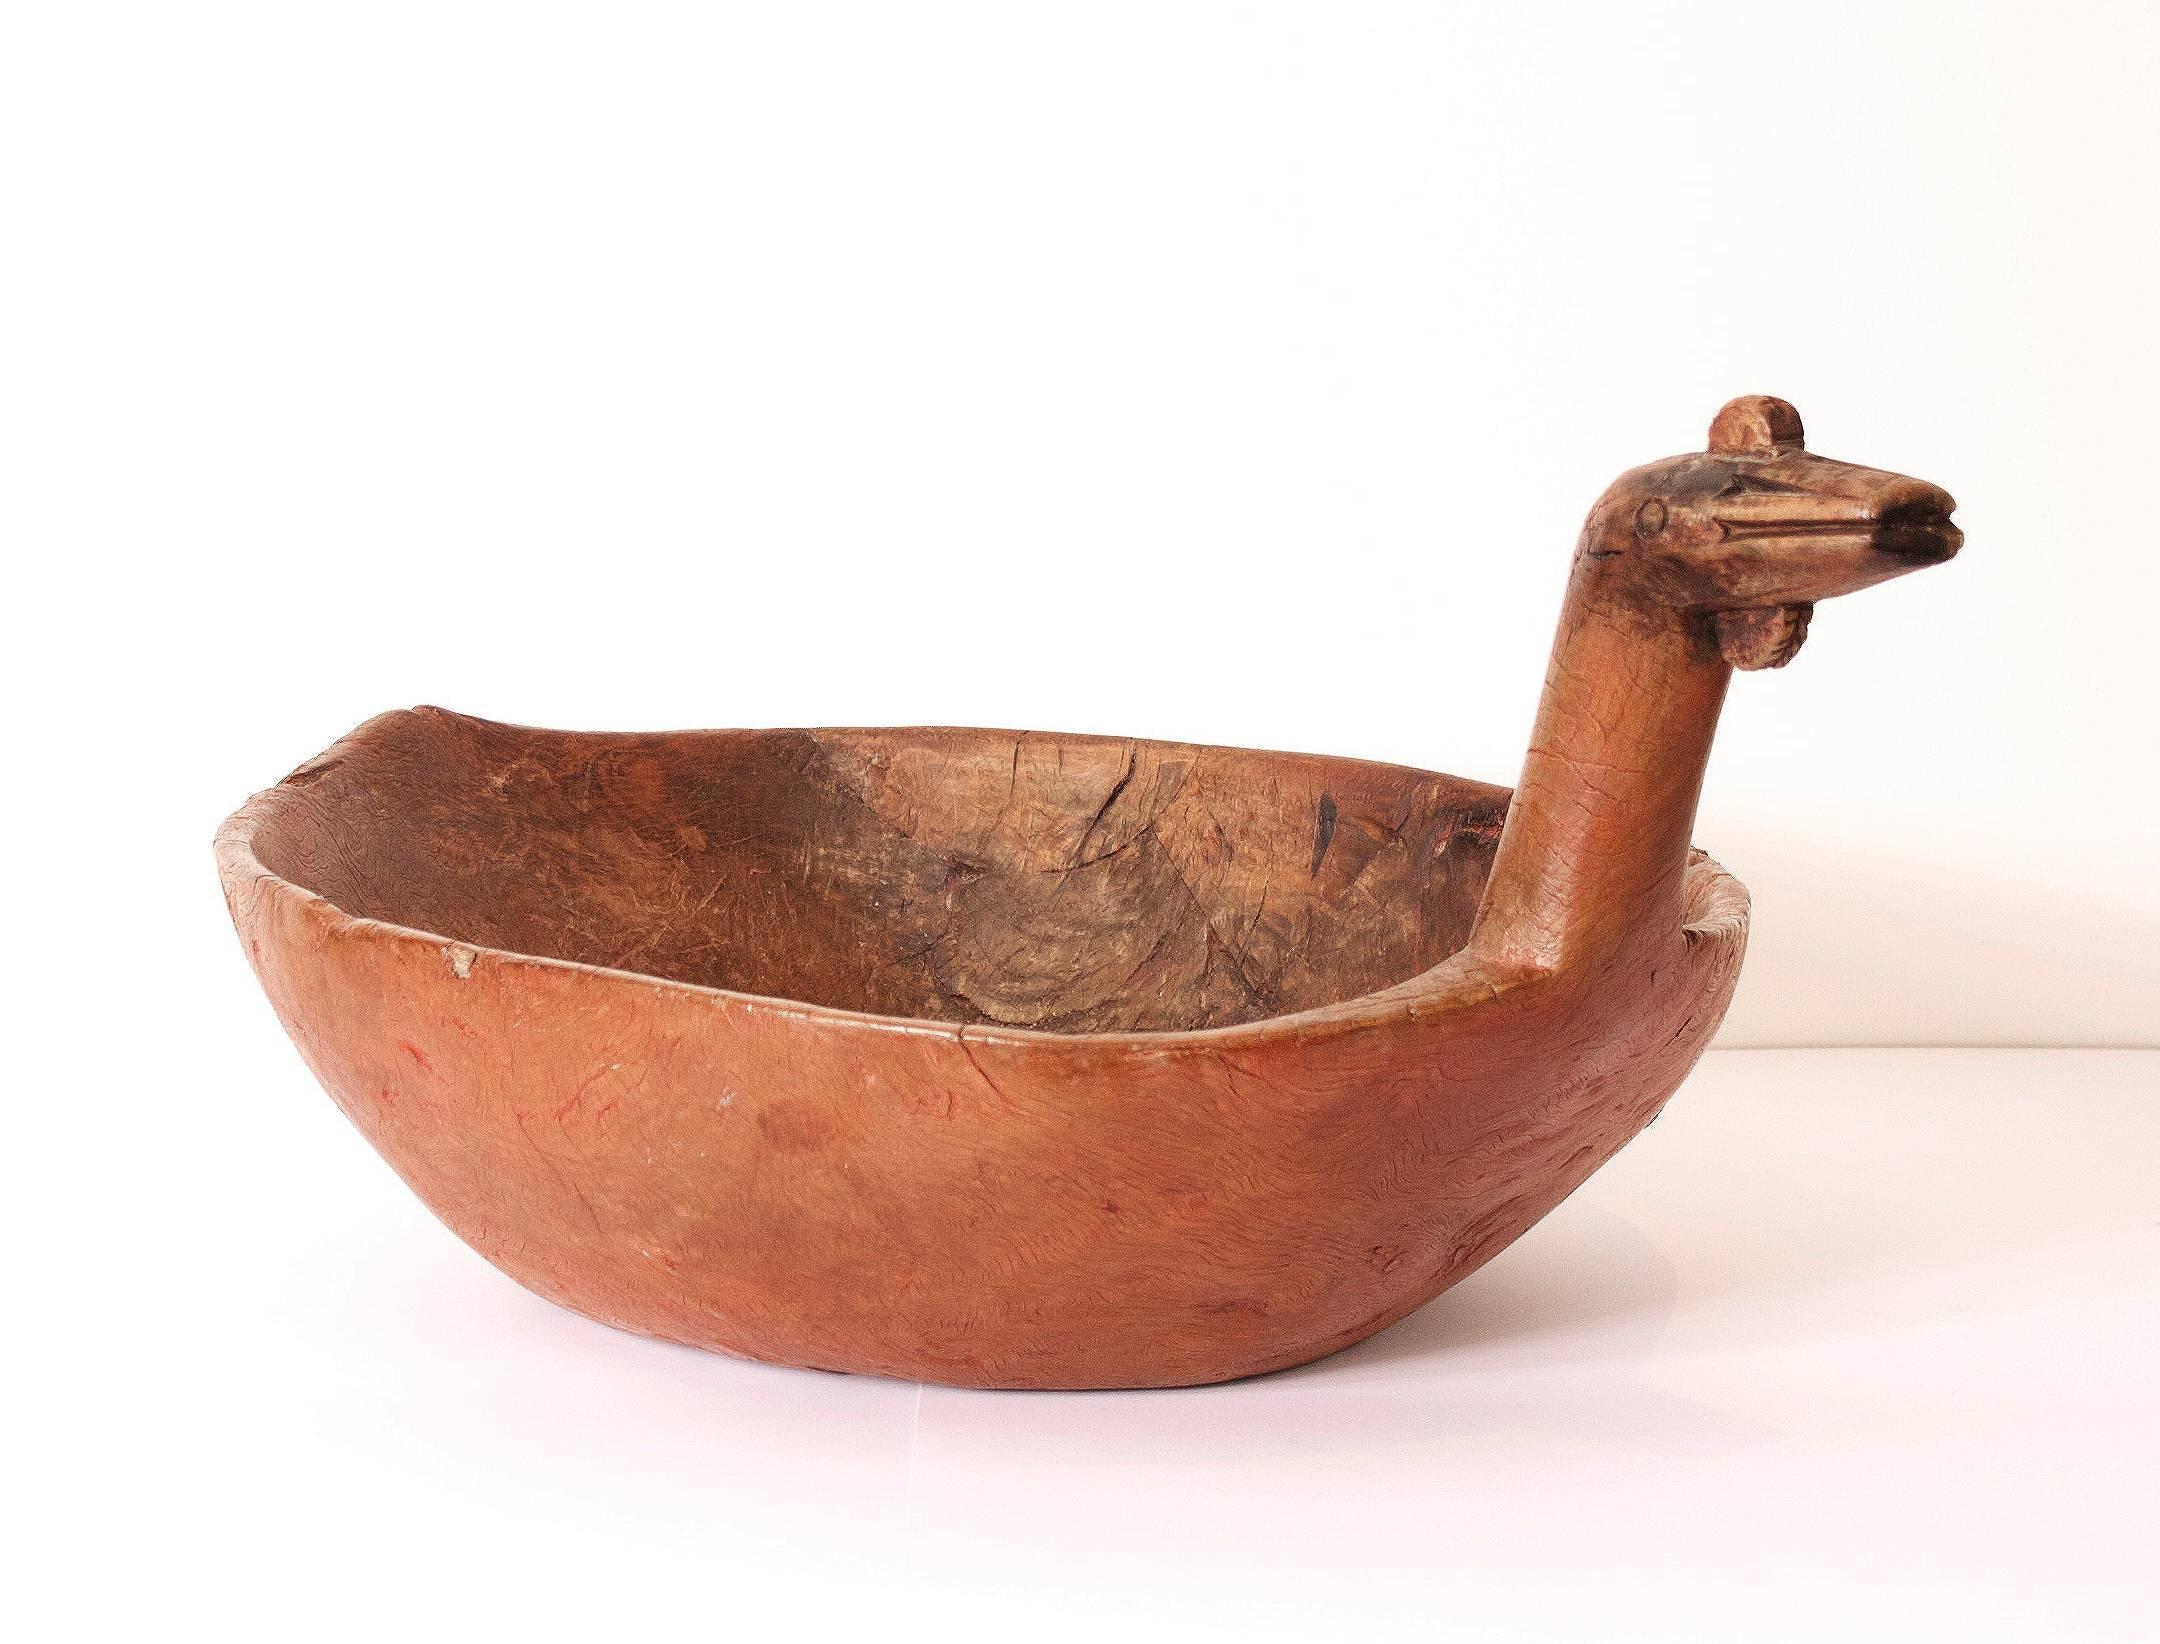 A large and rear ale bowl from Norway, Østerdalen. Marked underneath with OHS, OPS, MIDV, dated 1778.